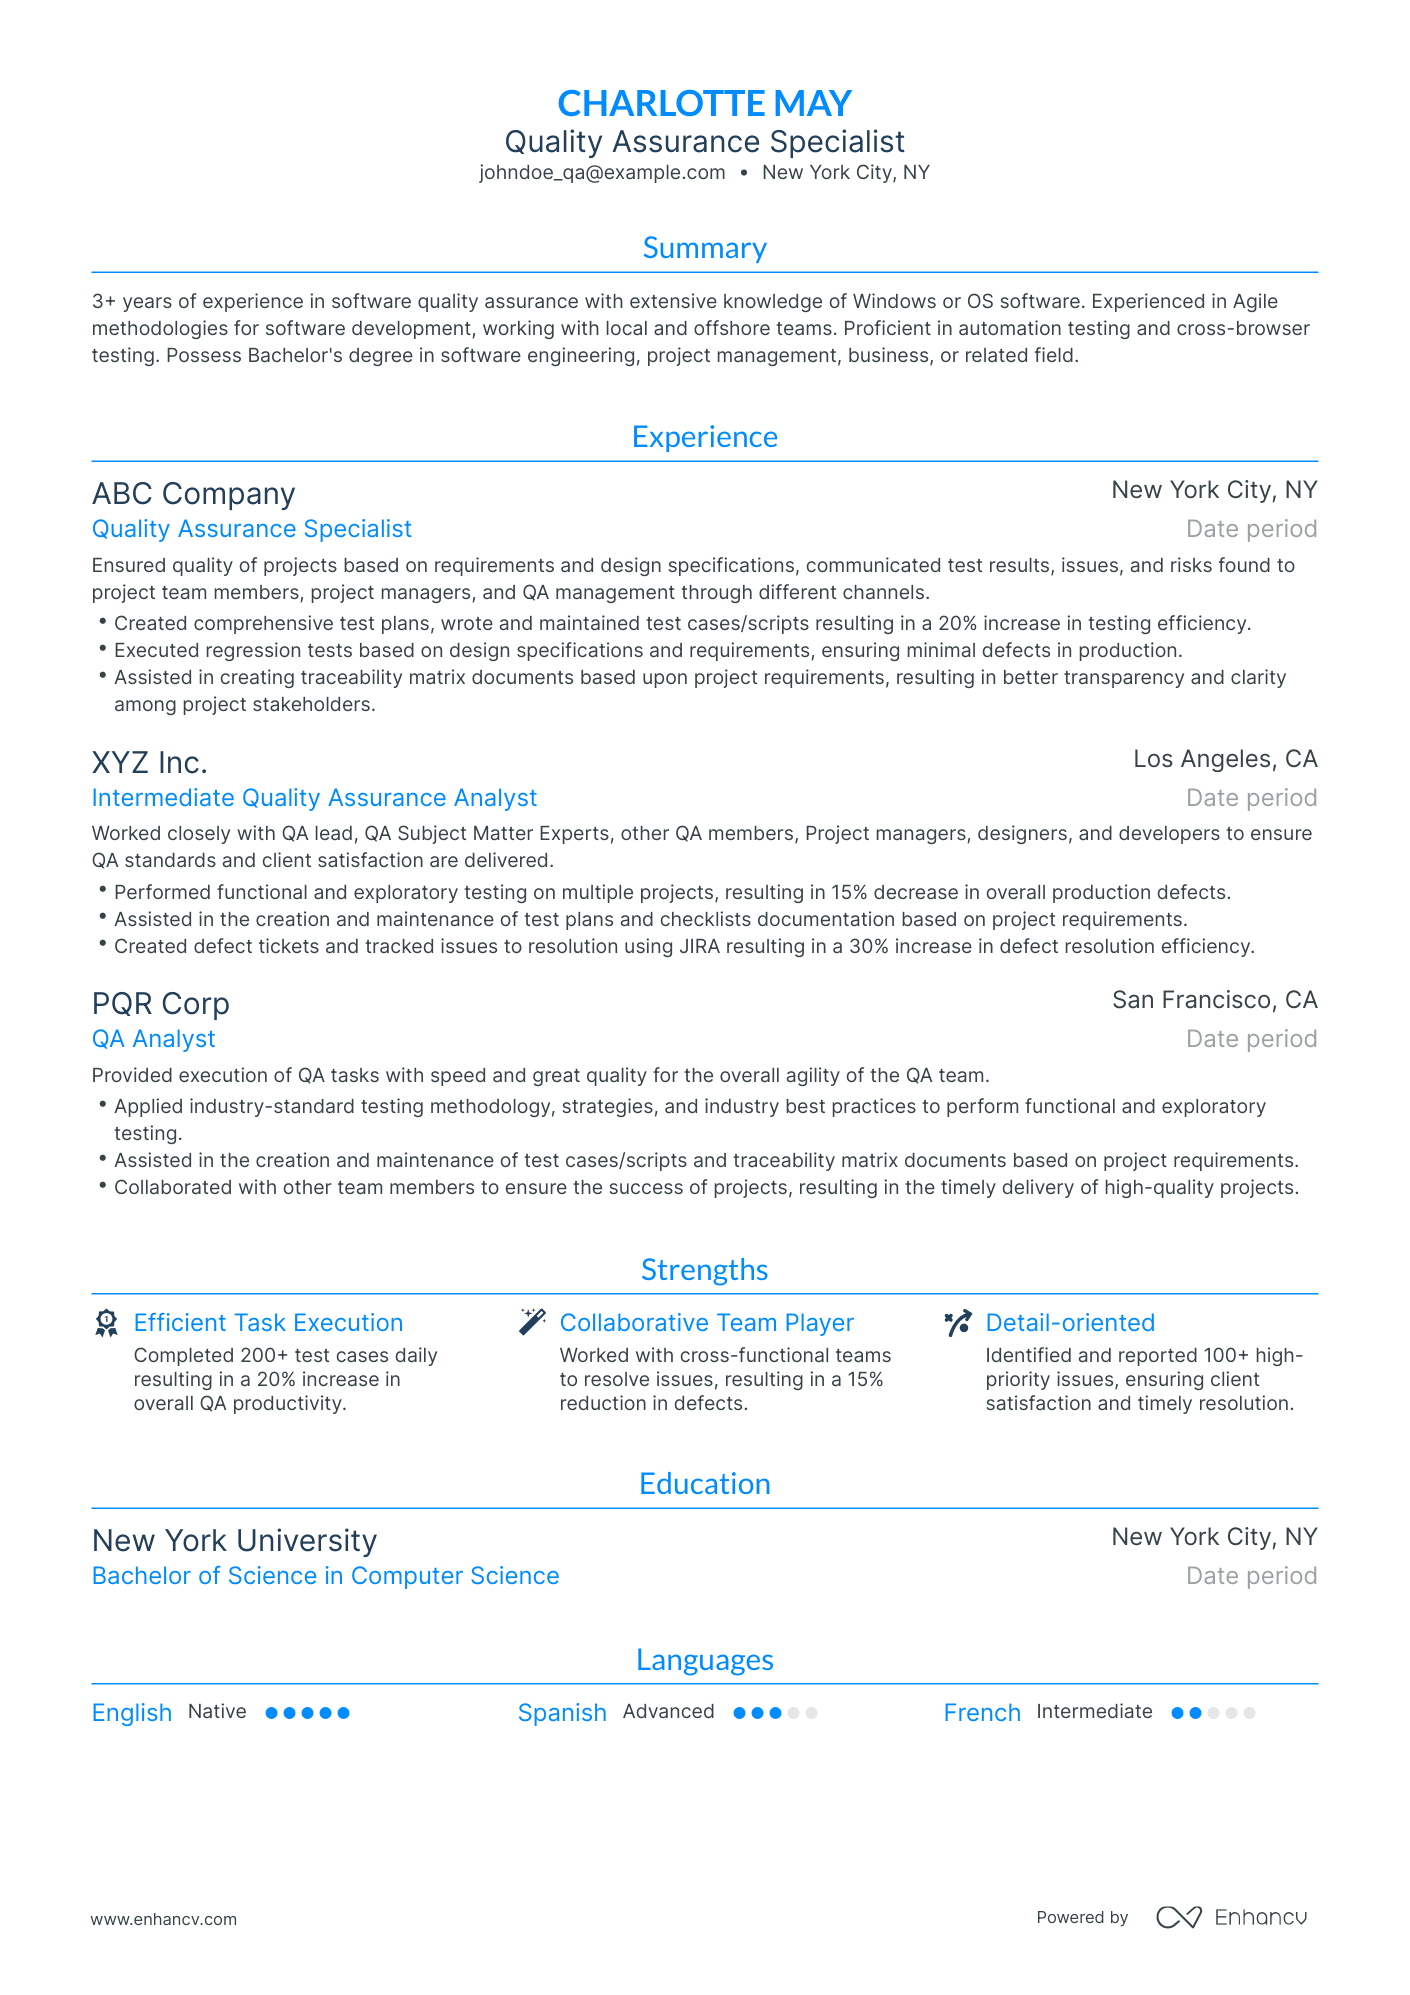 Traditional Quality Assurance Specialist Resume Template